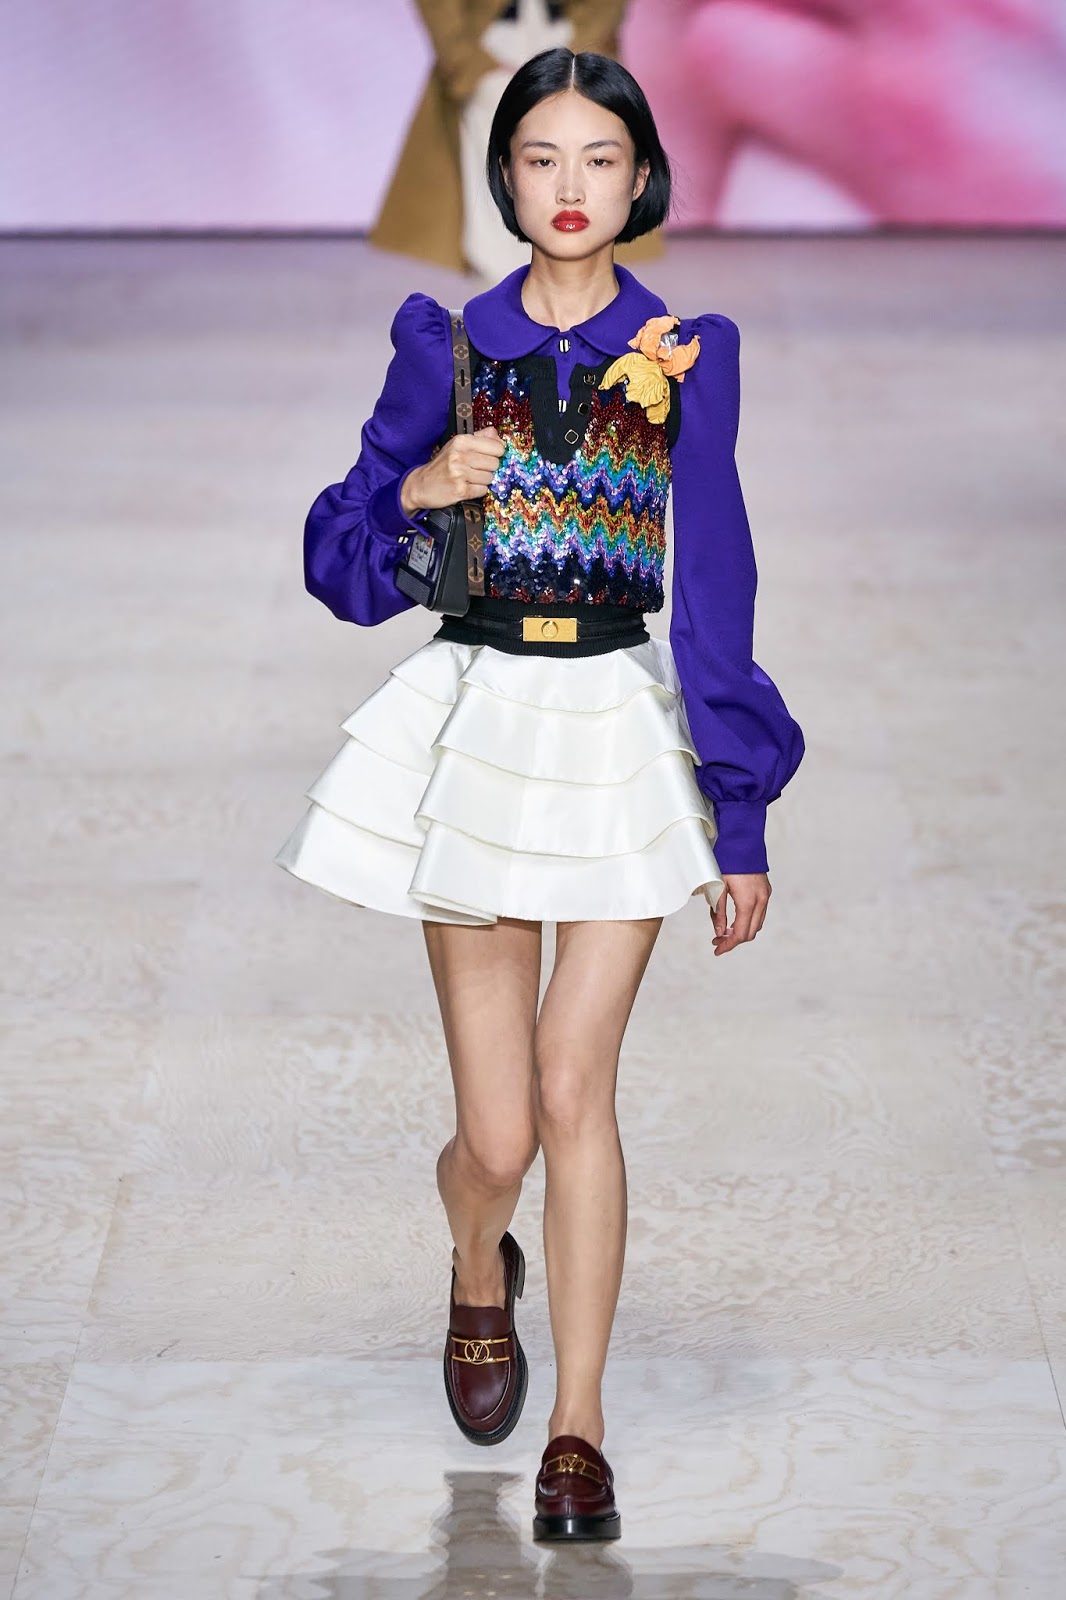 MIXING IT UP ON THE RUNWAY: LOUIS VUITTON